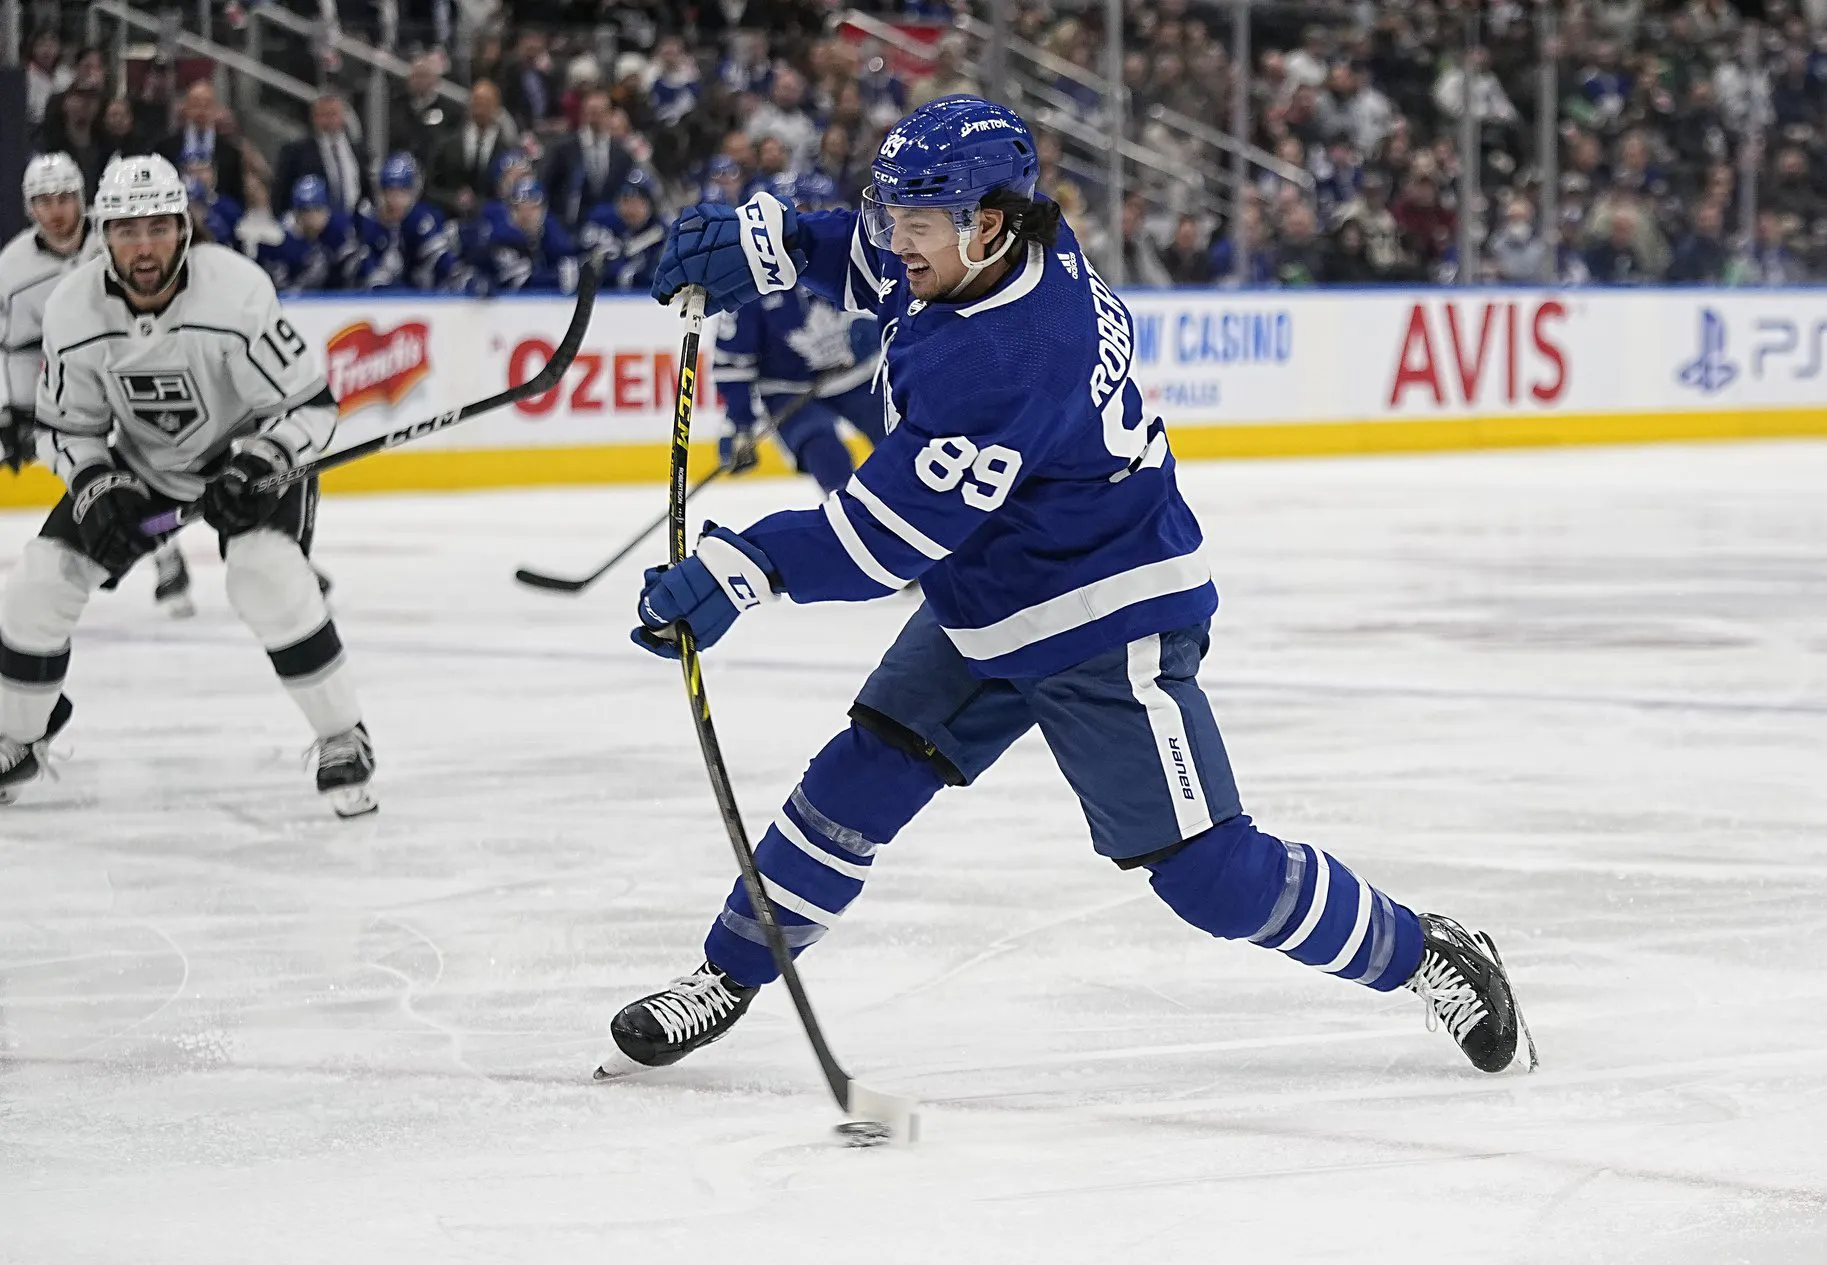 Toronto Maple Leafs’ Nick Robertson to miss ‘significant time’ with shoulder injury